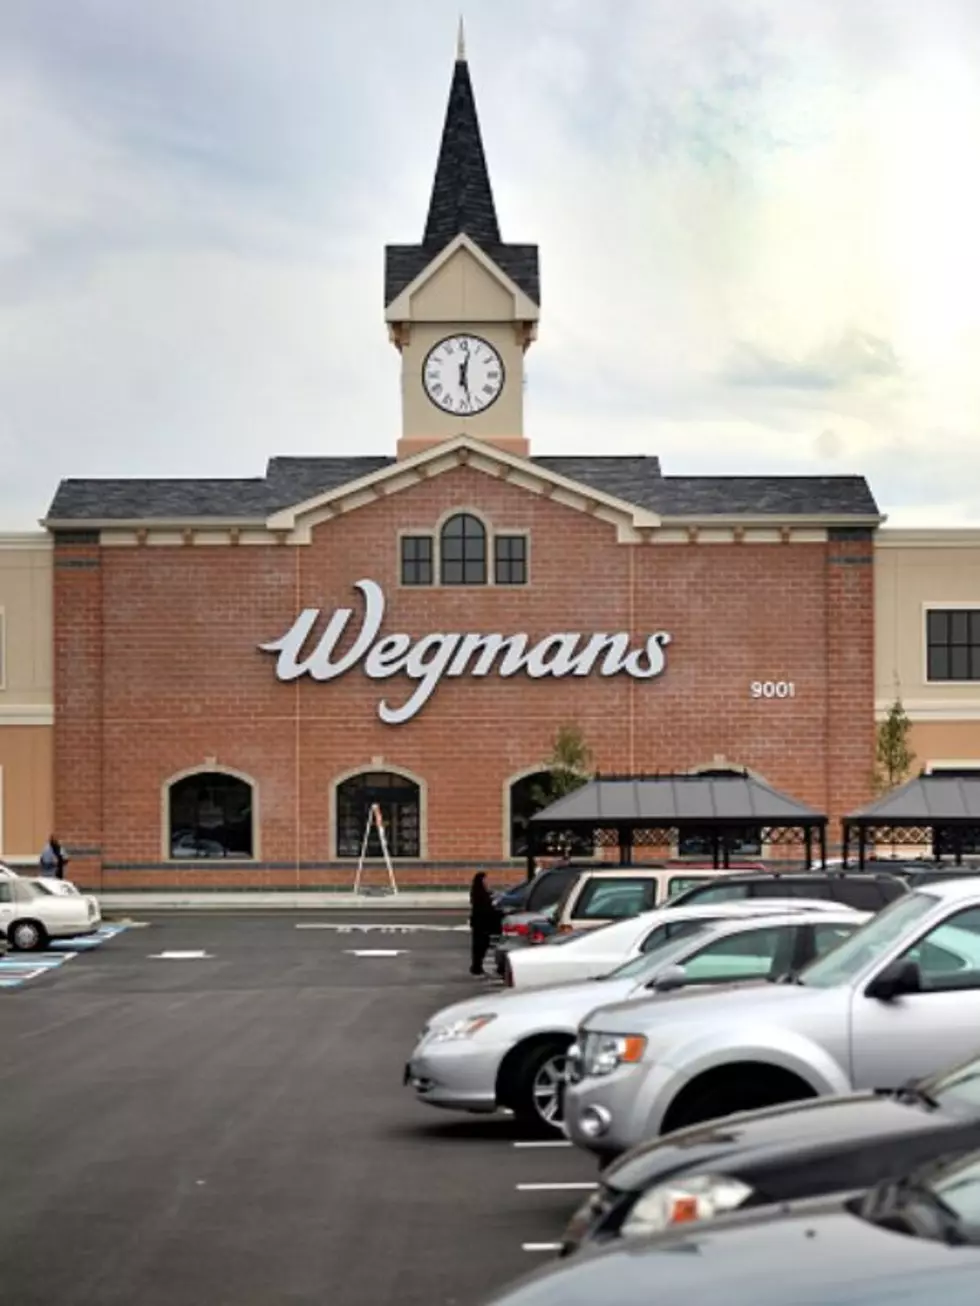 3,000 People Waited In Line At Wegmans Grand Opening In North Carolina